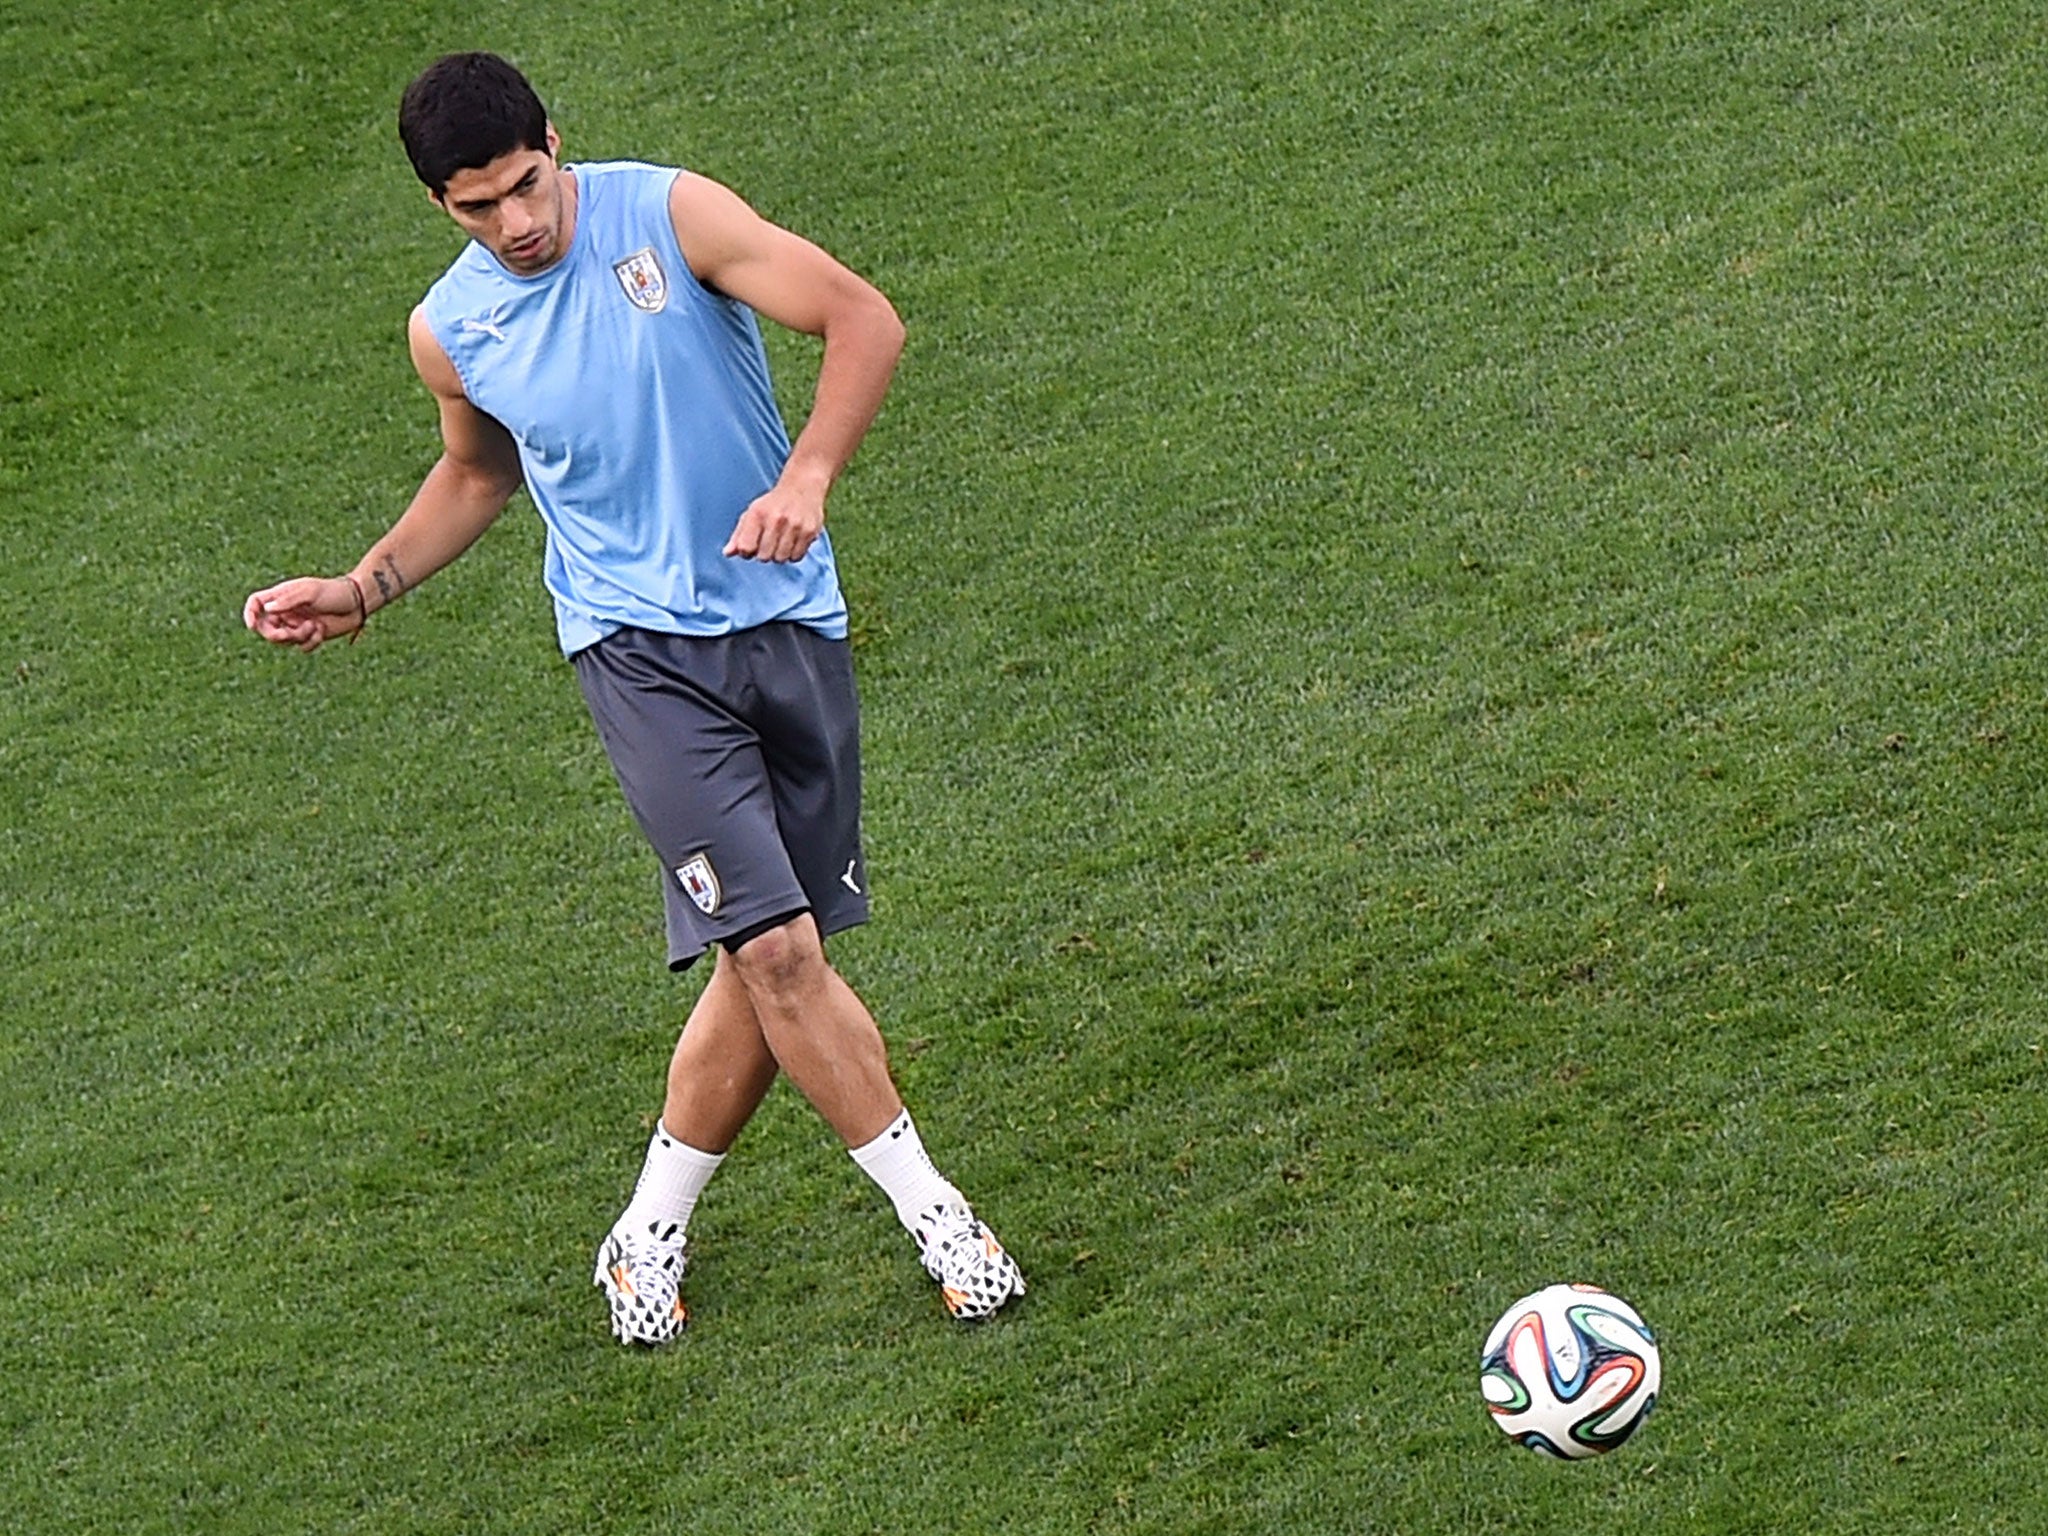 Luis Suarez will still be a threat but won't be fully fit for the game